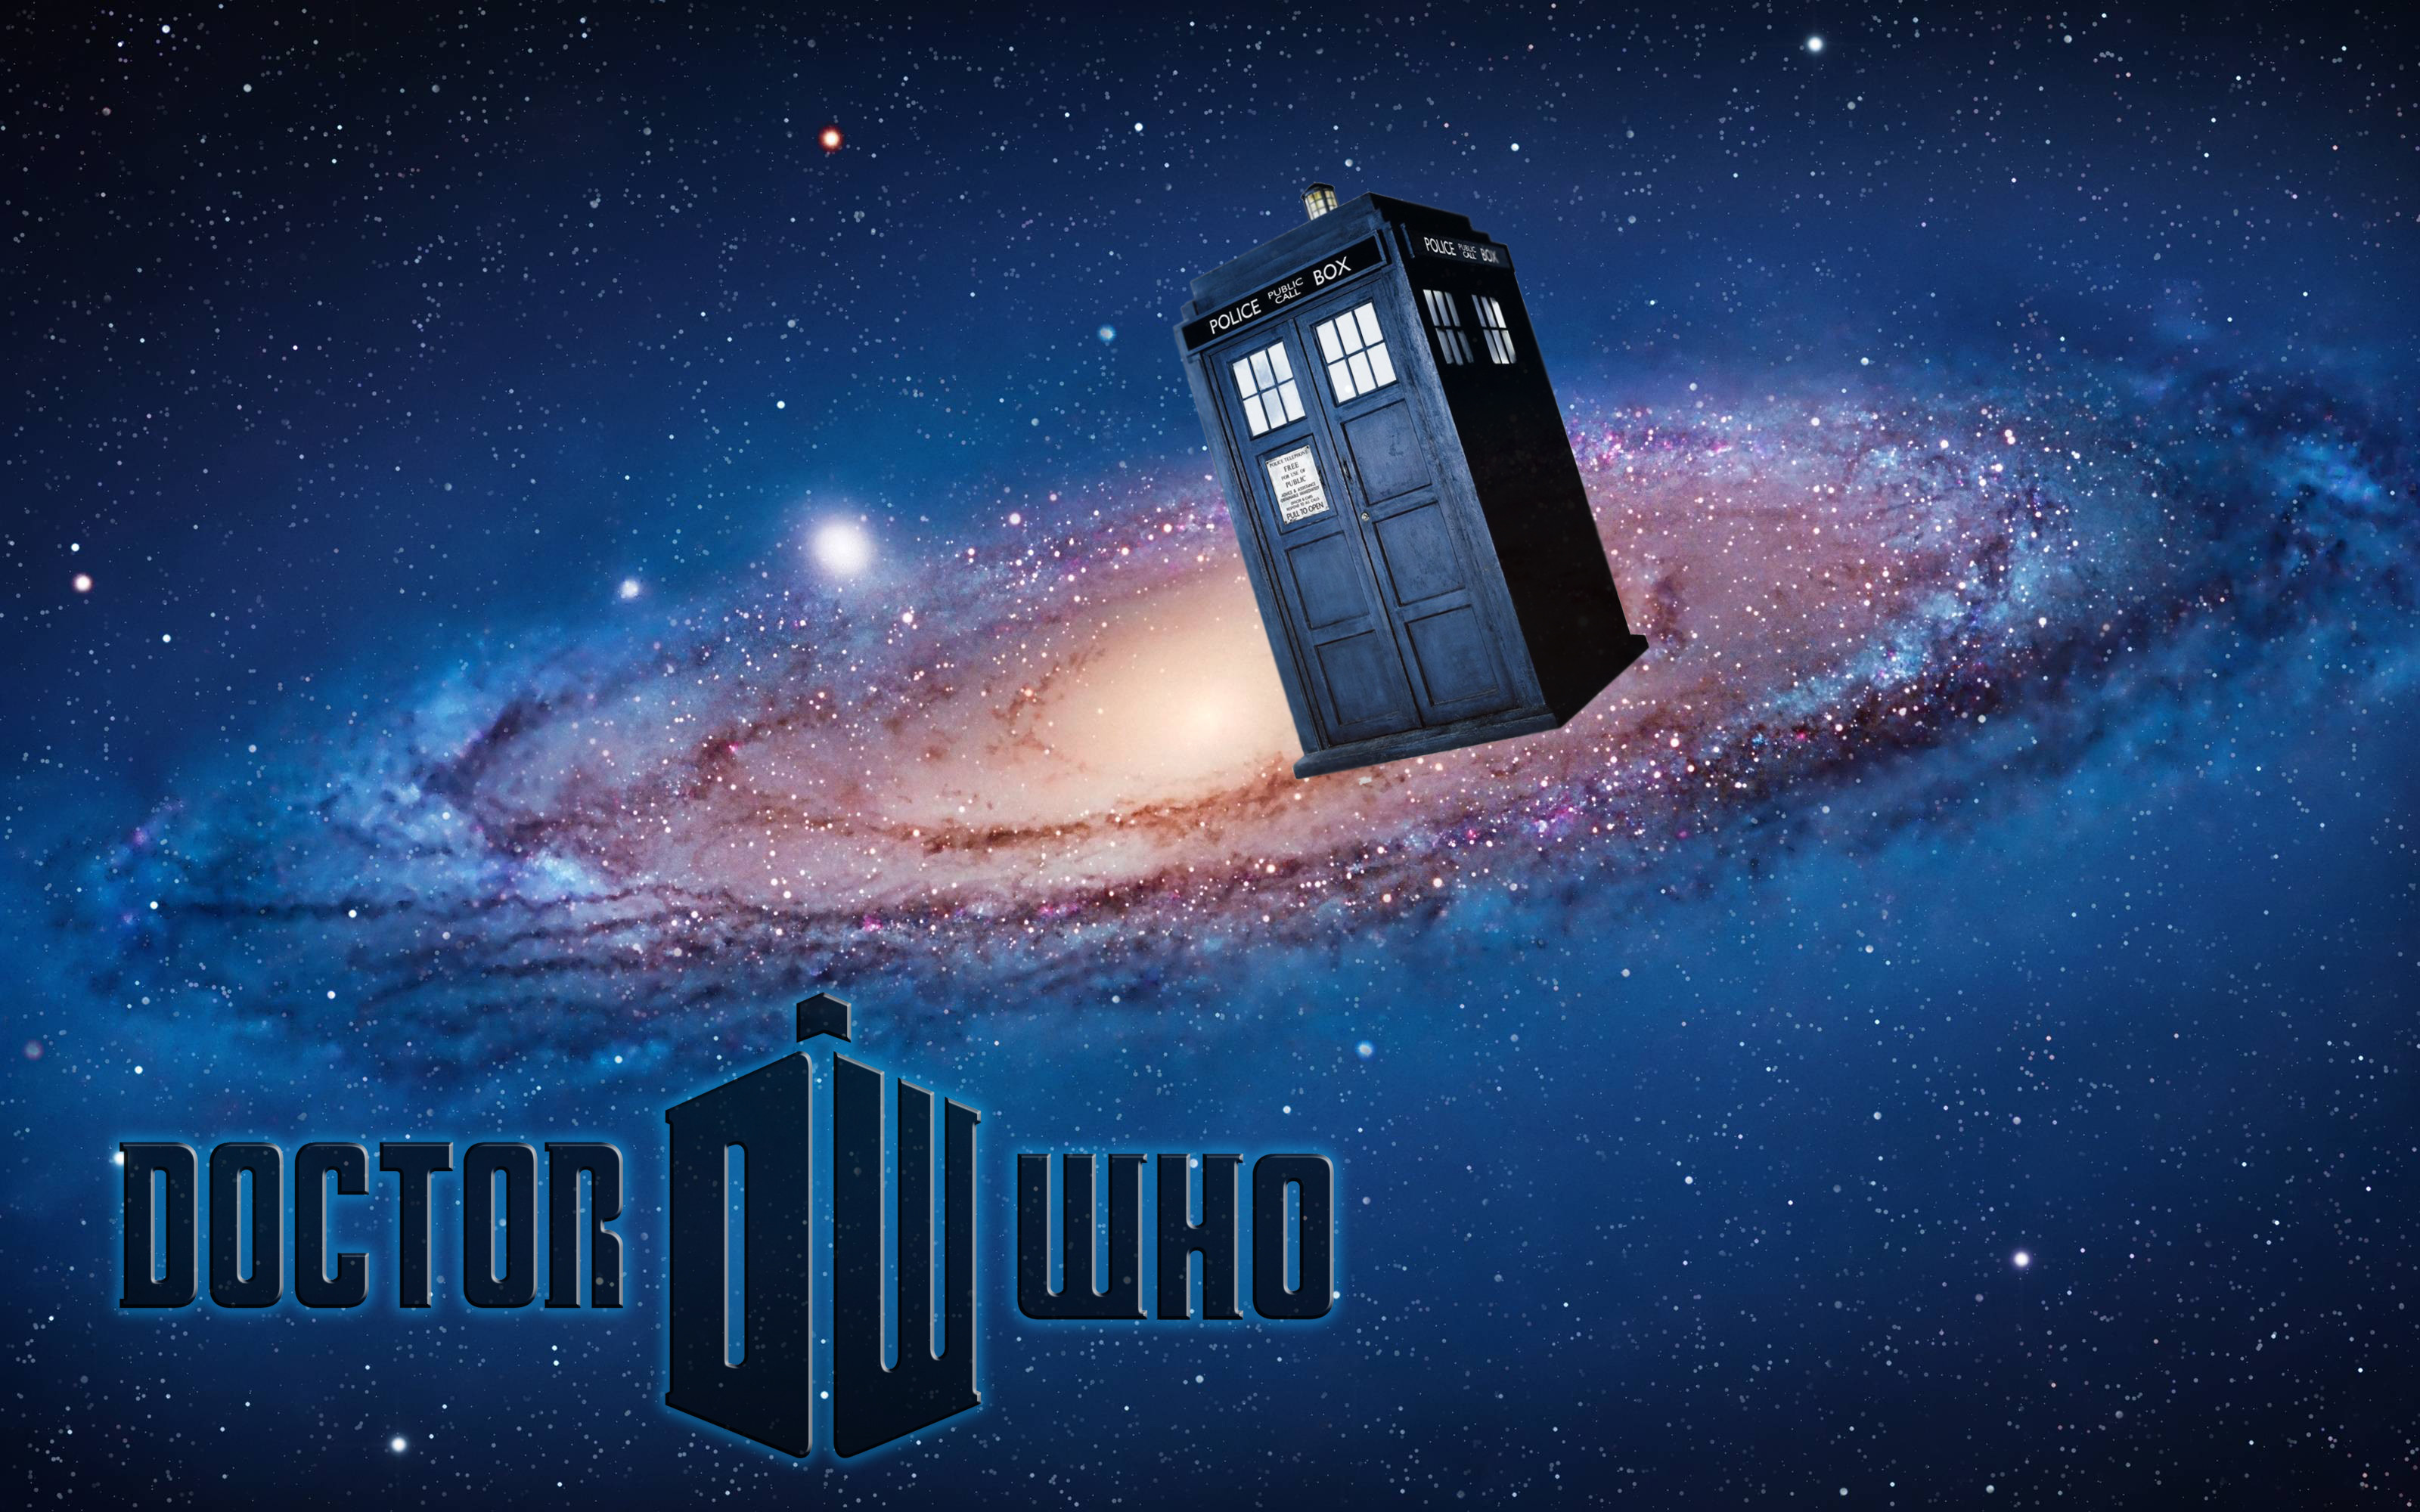 3200x2000 ... iPhoneWallpapers Doctor Who TARDIS Wallpaper (Mac) by iPhoneWallpapers